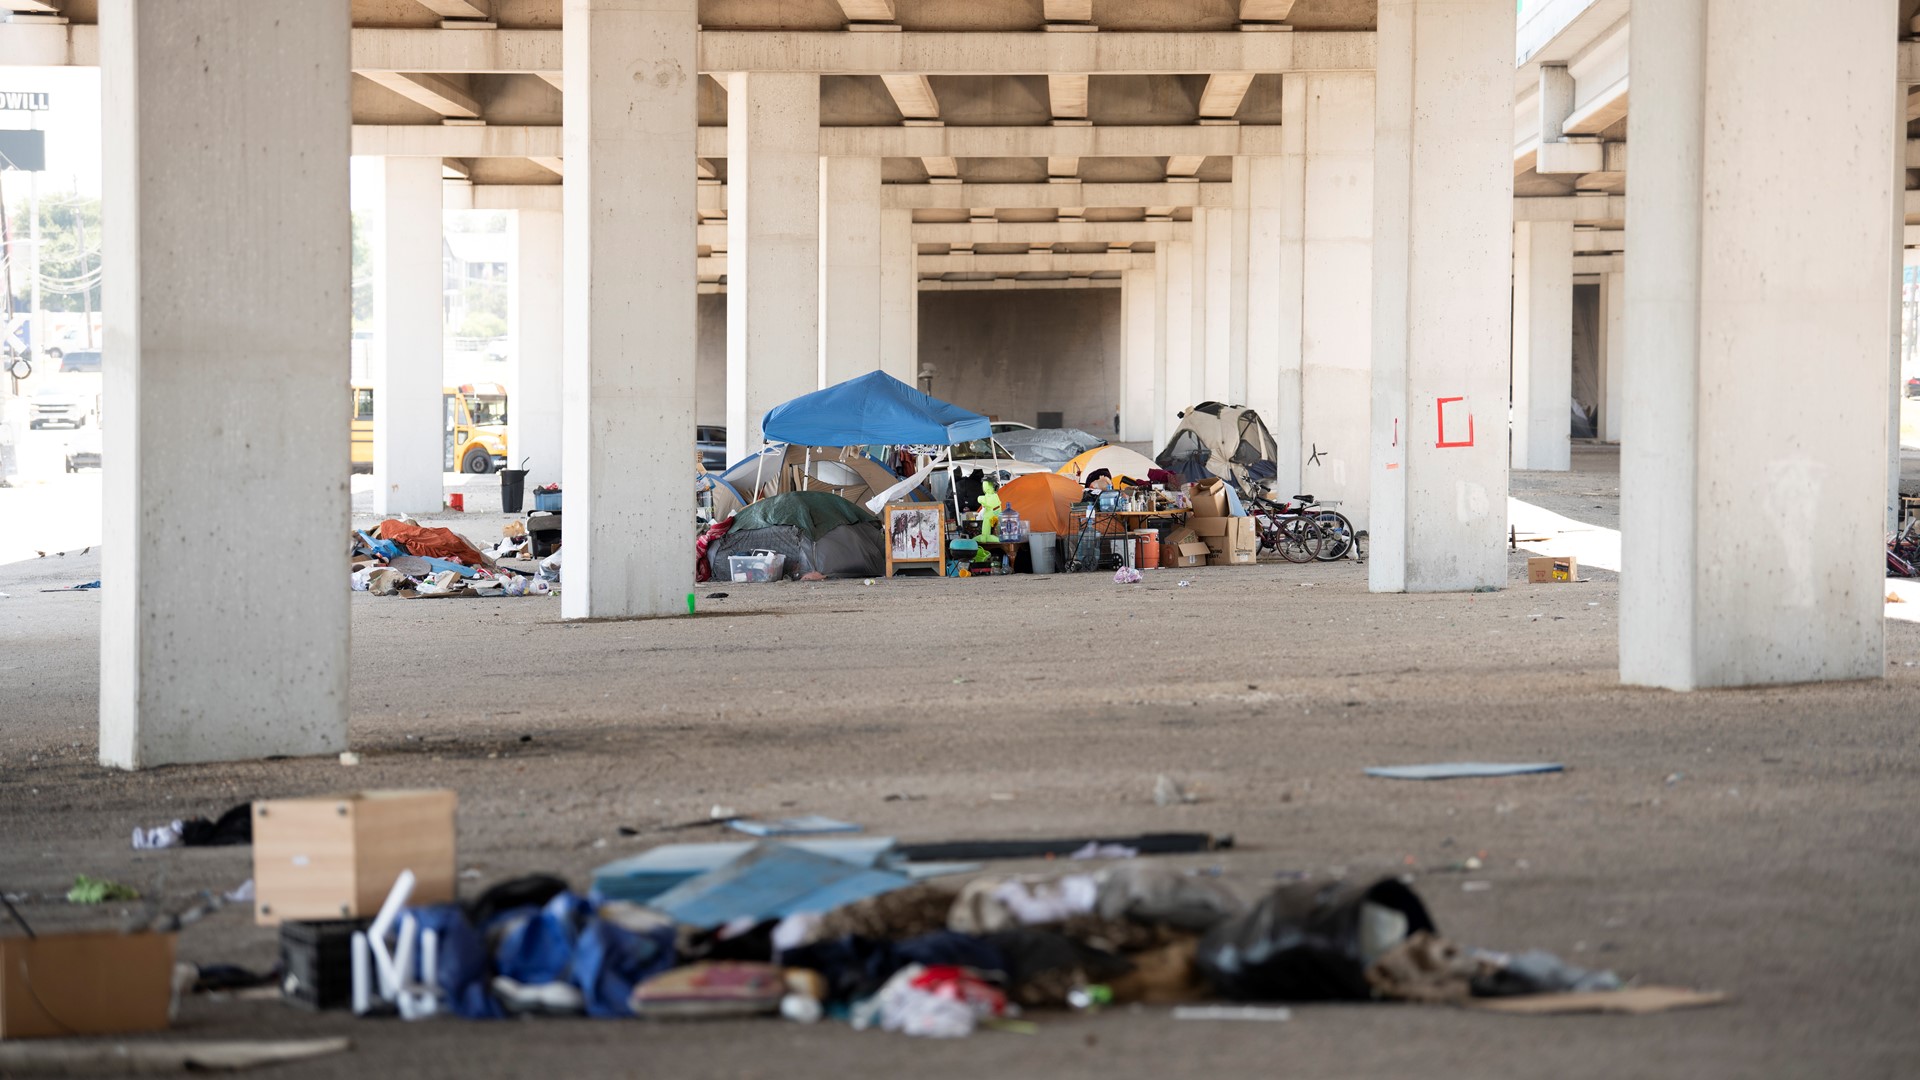 We take a closer look at the demographics of people experiencing homelessness in Austin and Travis County.